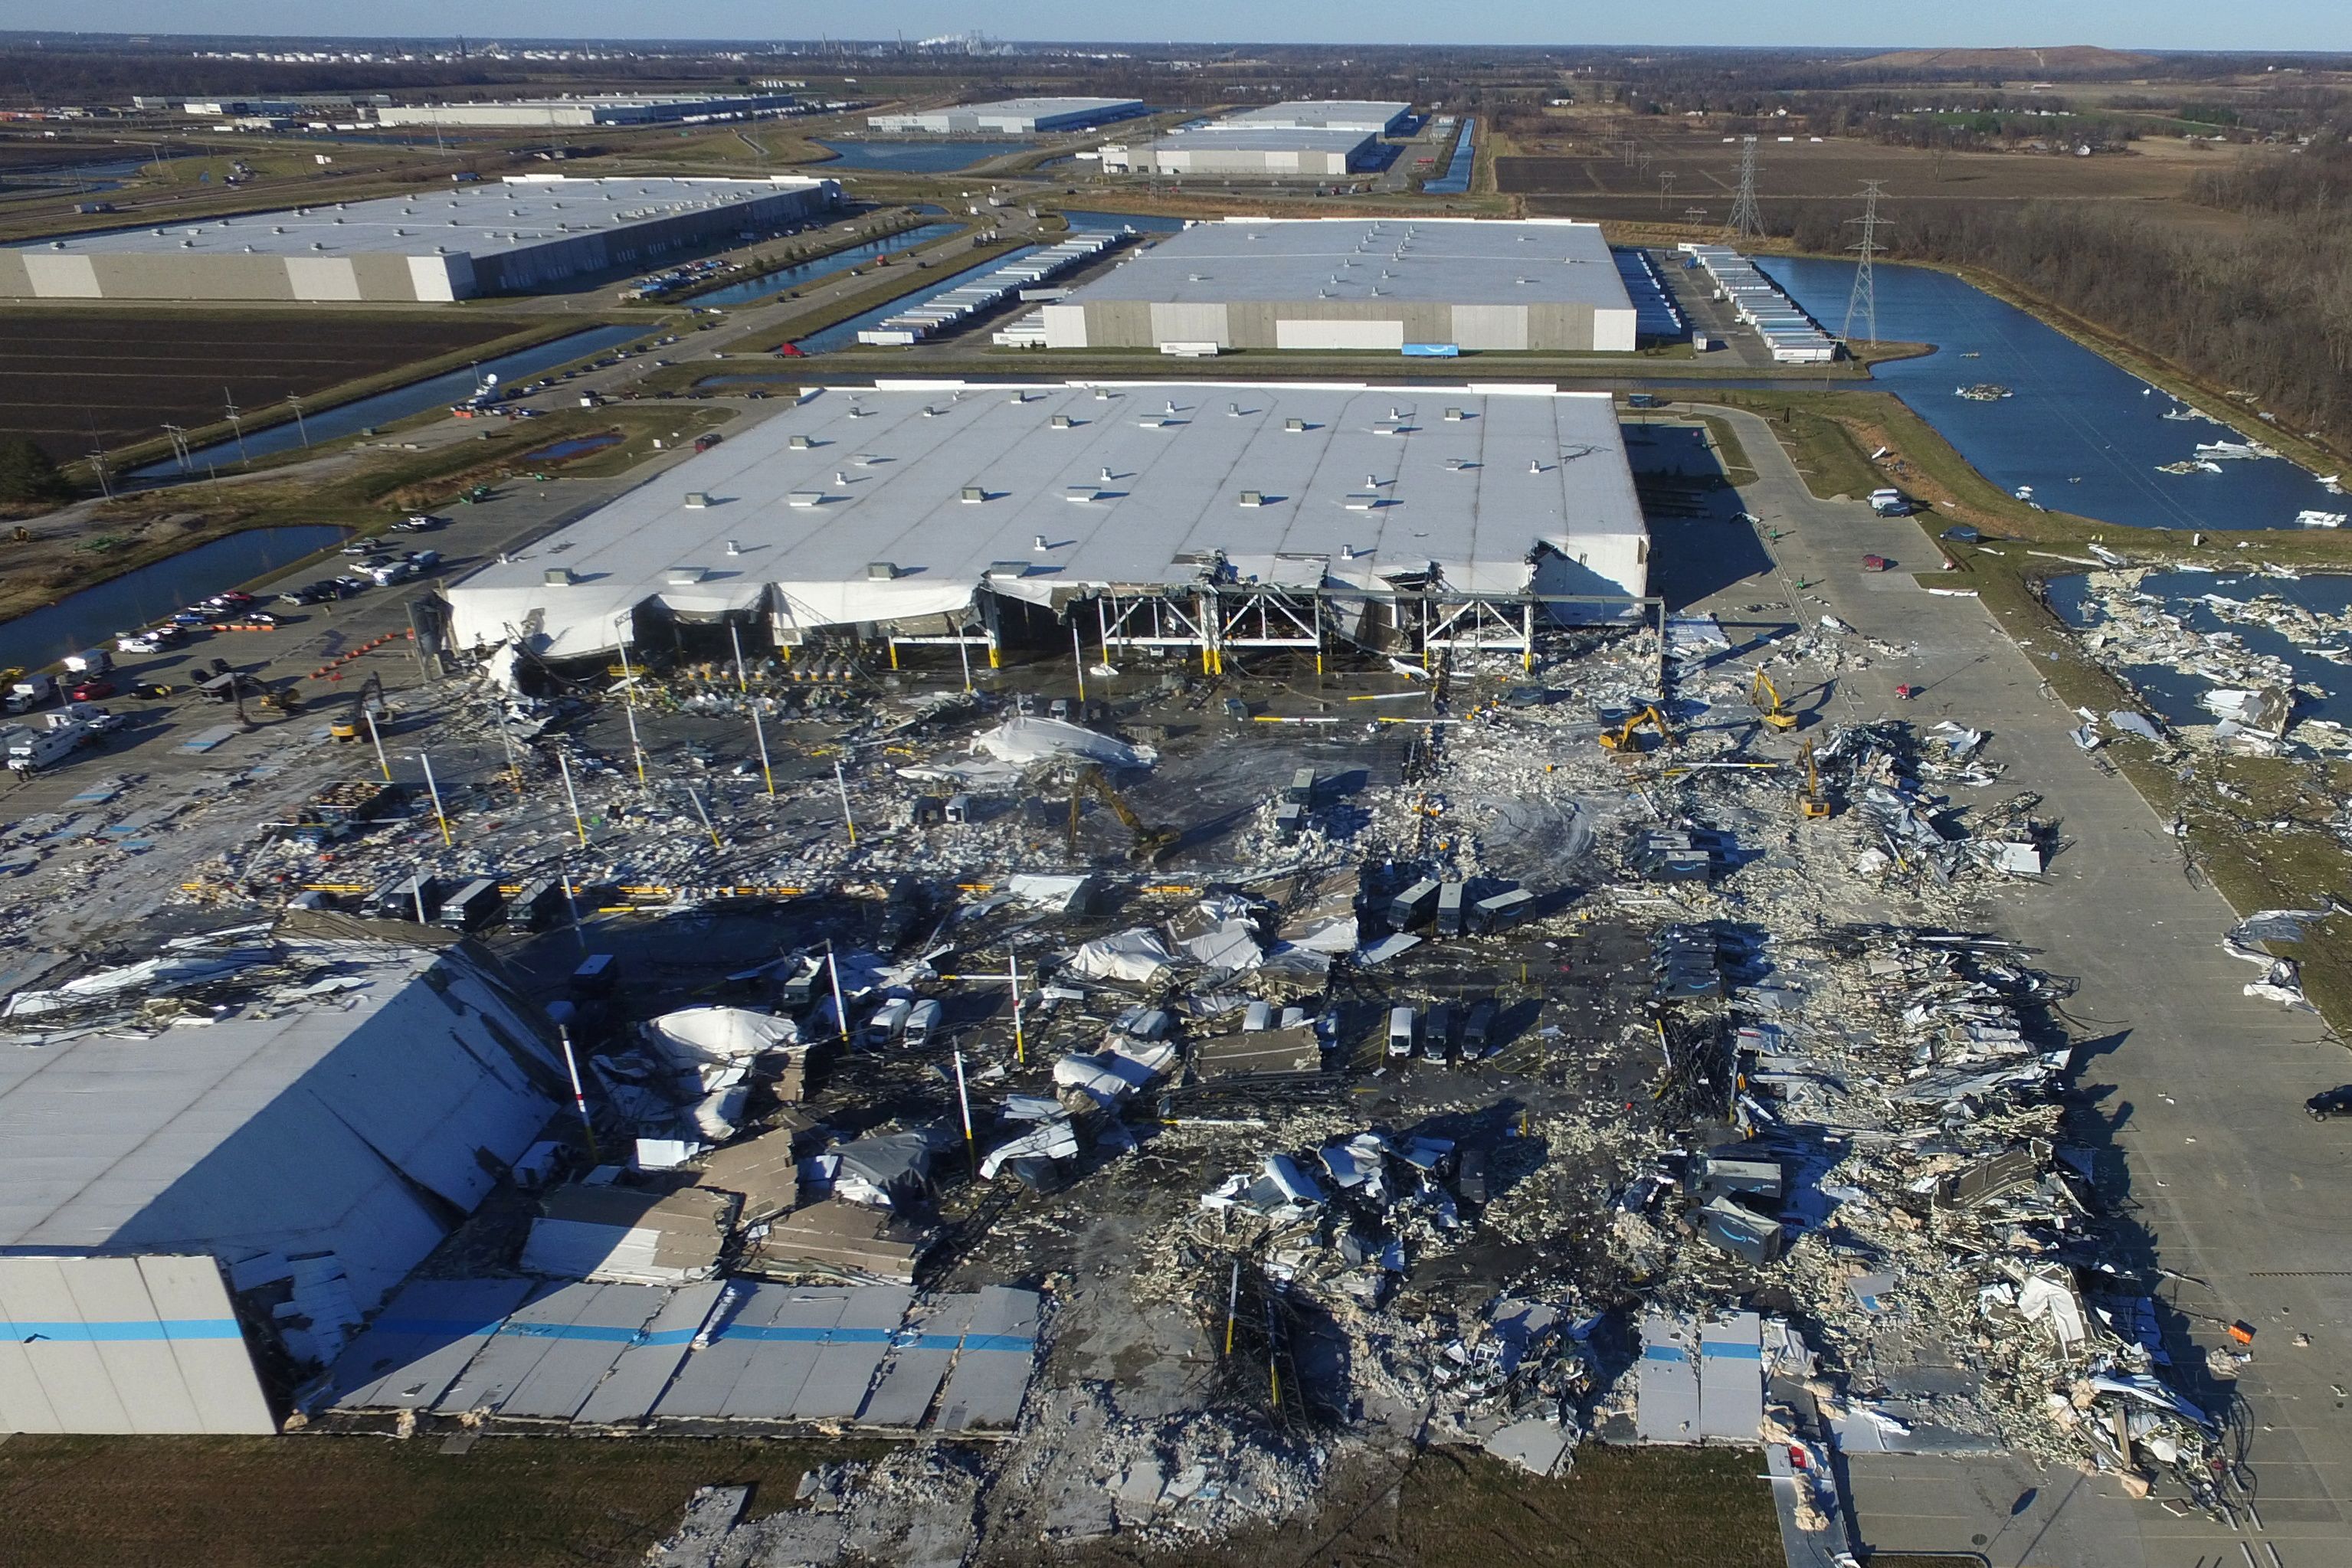 The site of a roof collapse at an Amazon.com distribution centre a day after a series of tornadoes dealt a blow to several U.S. states, in Edwardsville, Illinois, U.S. December 11, 2021. REUTERS/Drone Base